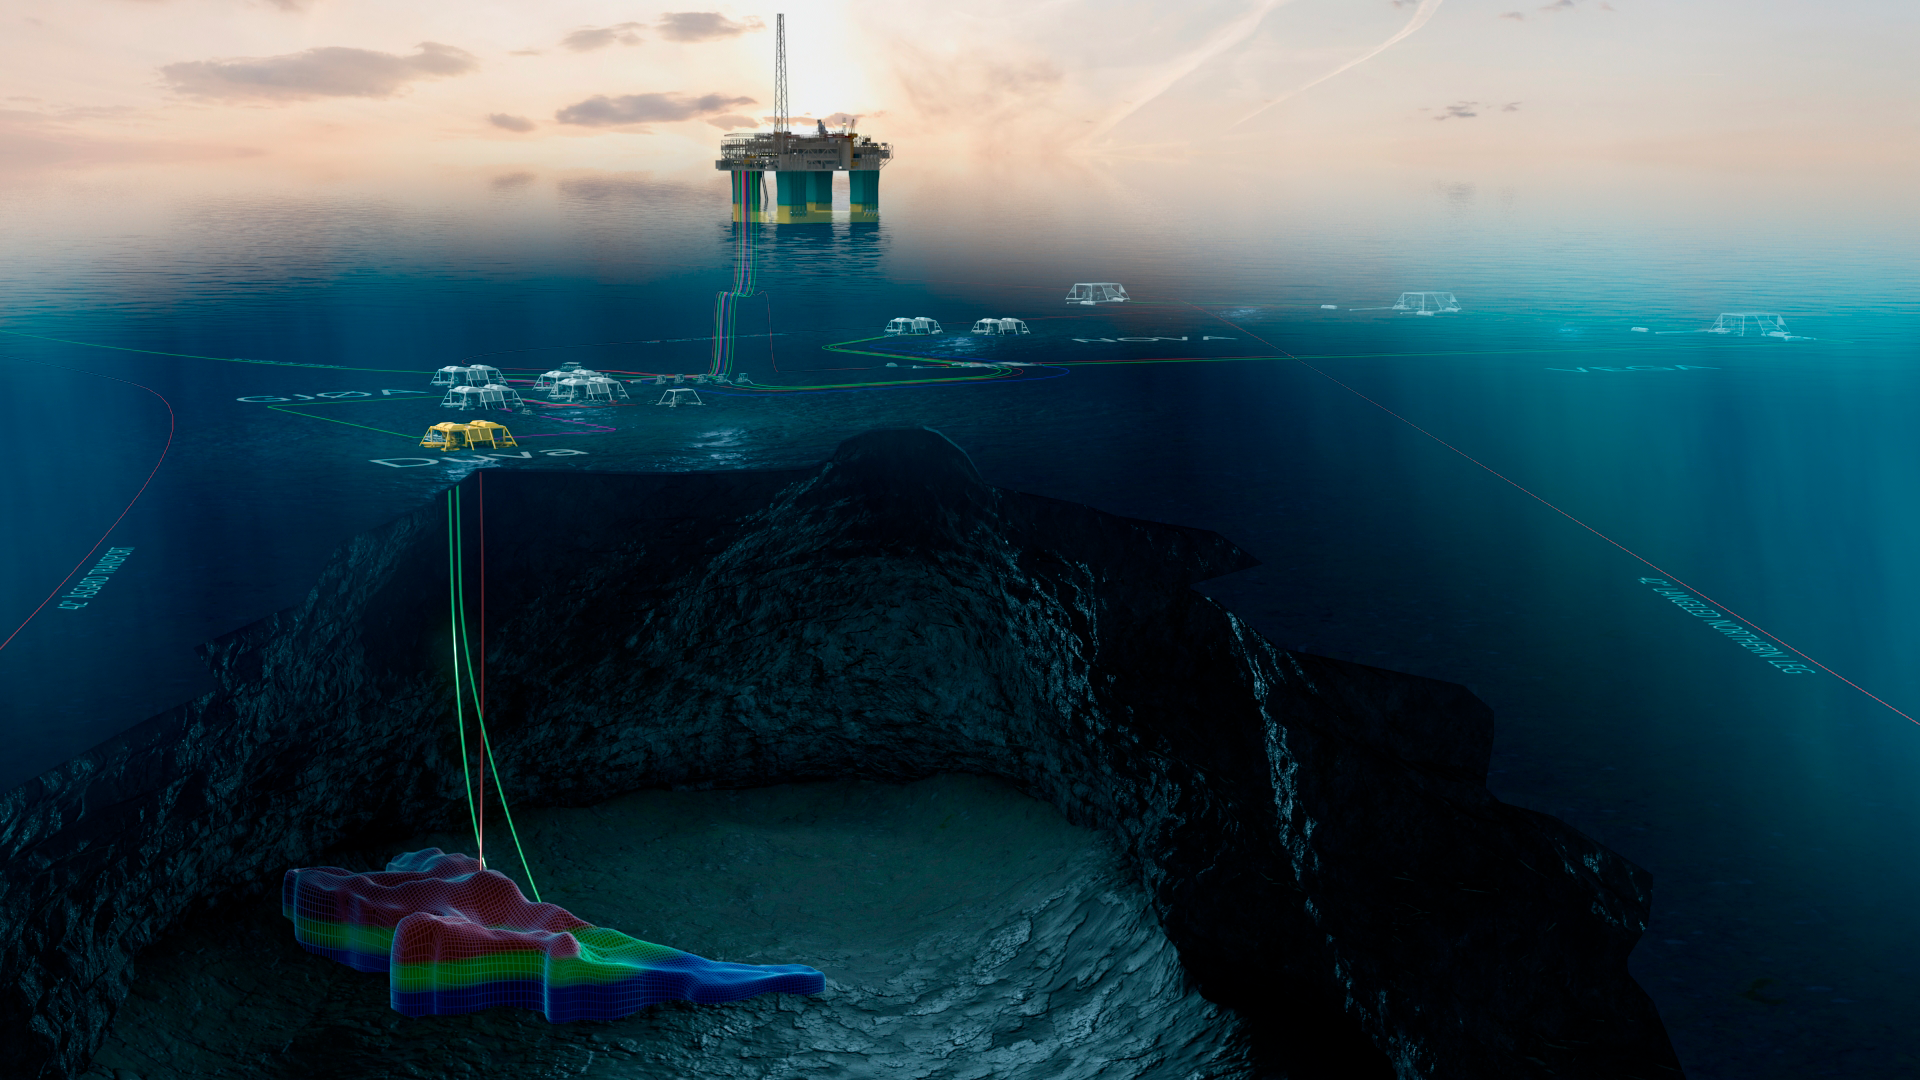 The reserves in Duva are estimated at 14 million standard cubic metres of oil equivalents (88 million barrels). The field will be developed with a subsea facility, and the oil and gas will be transported to Gjøa for processing and export. (Illustration: Neptune Energy)